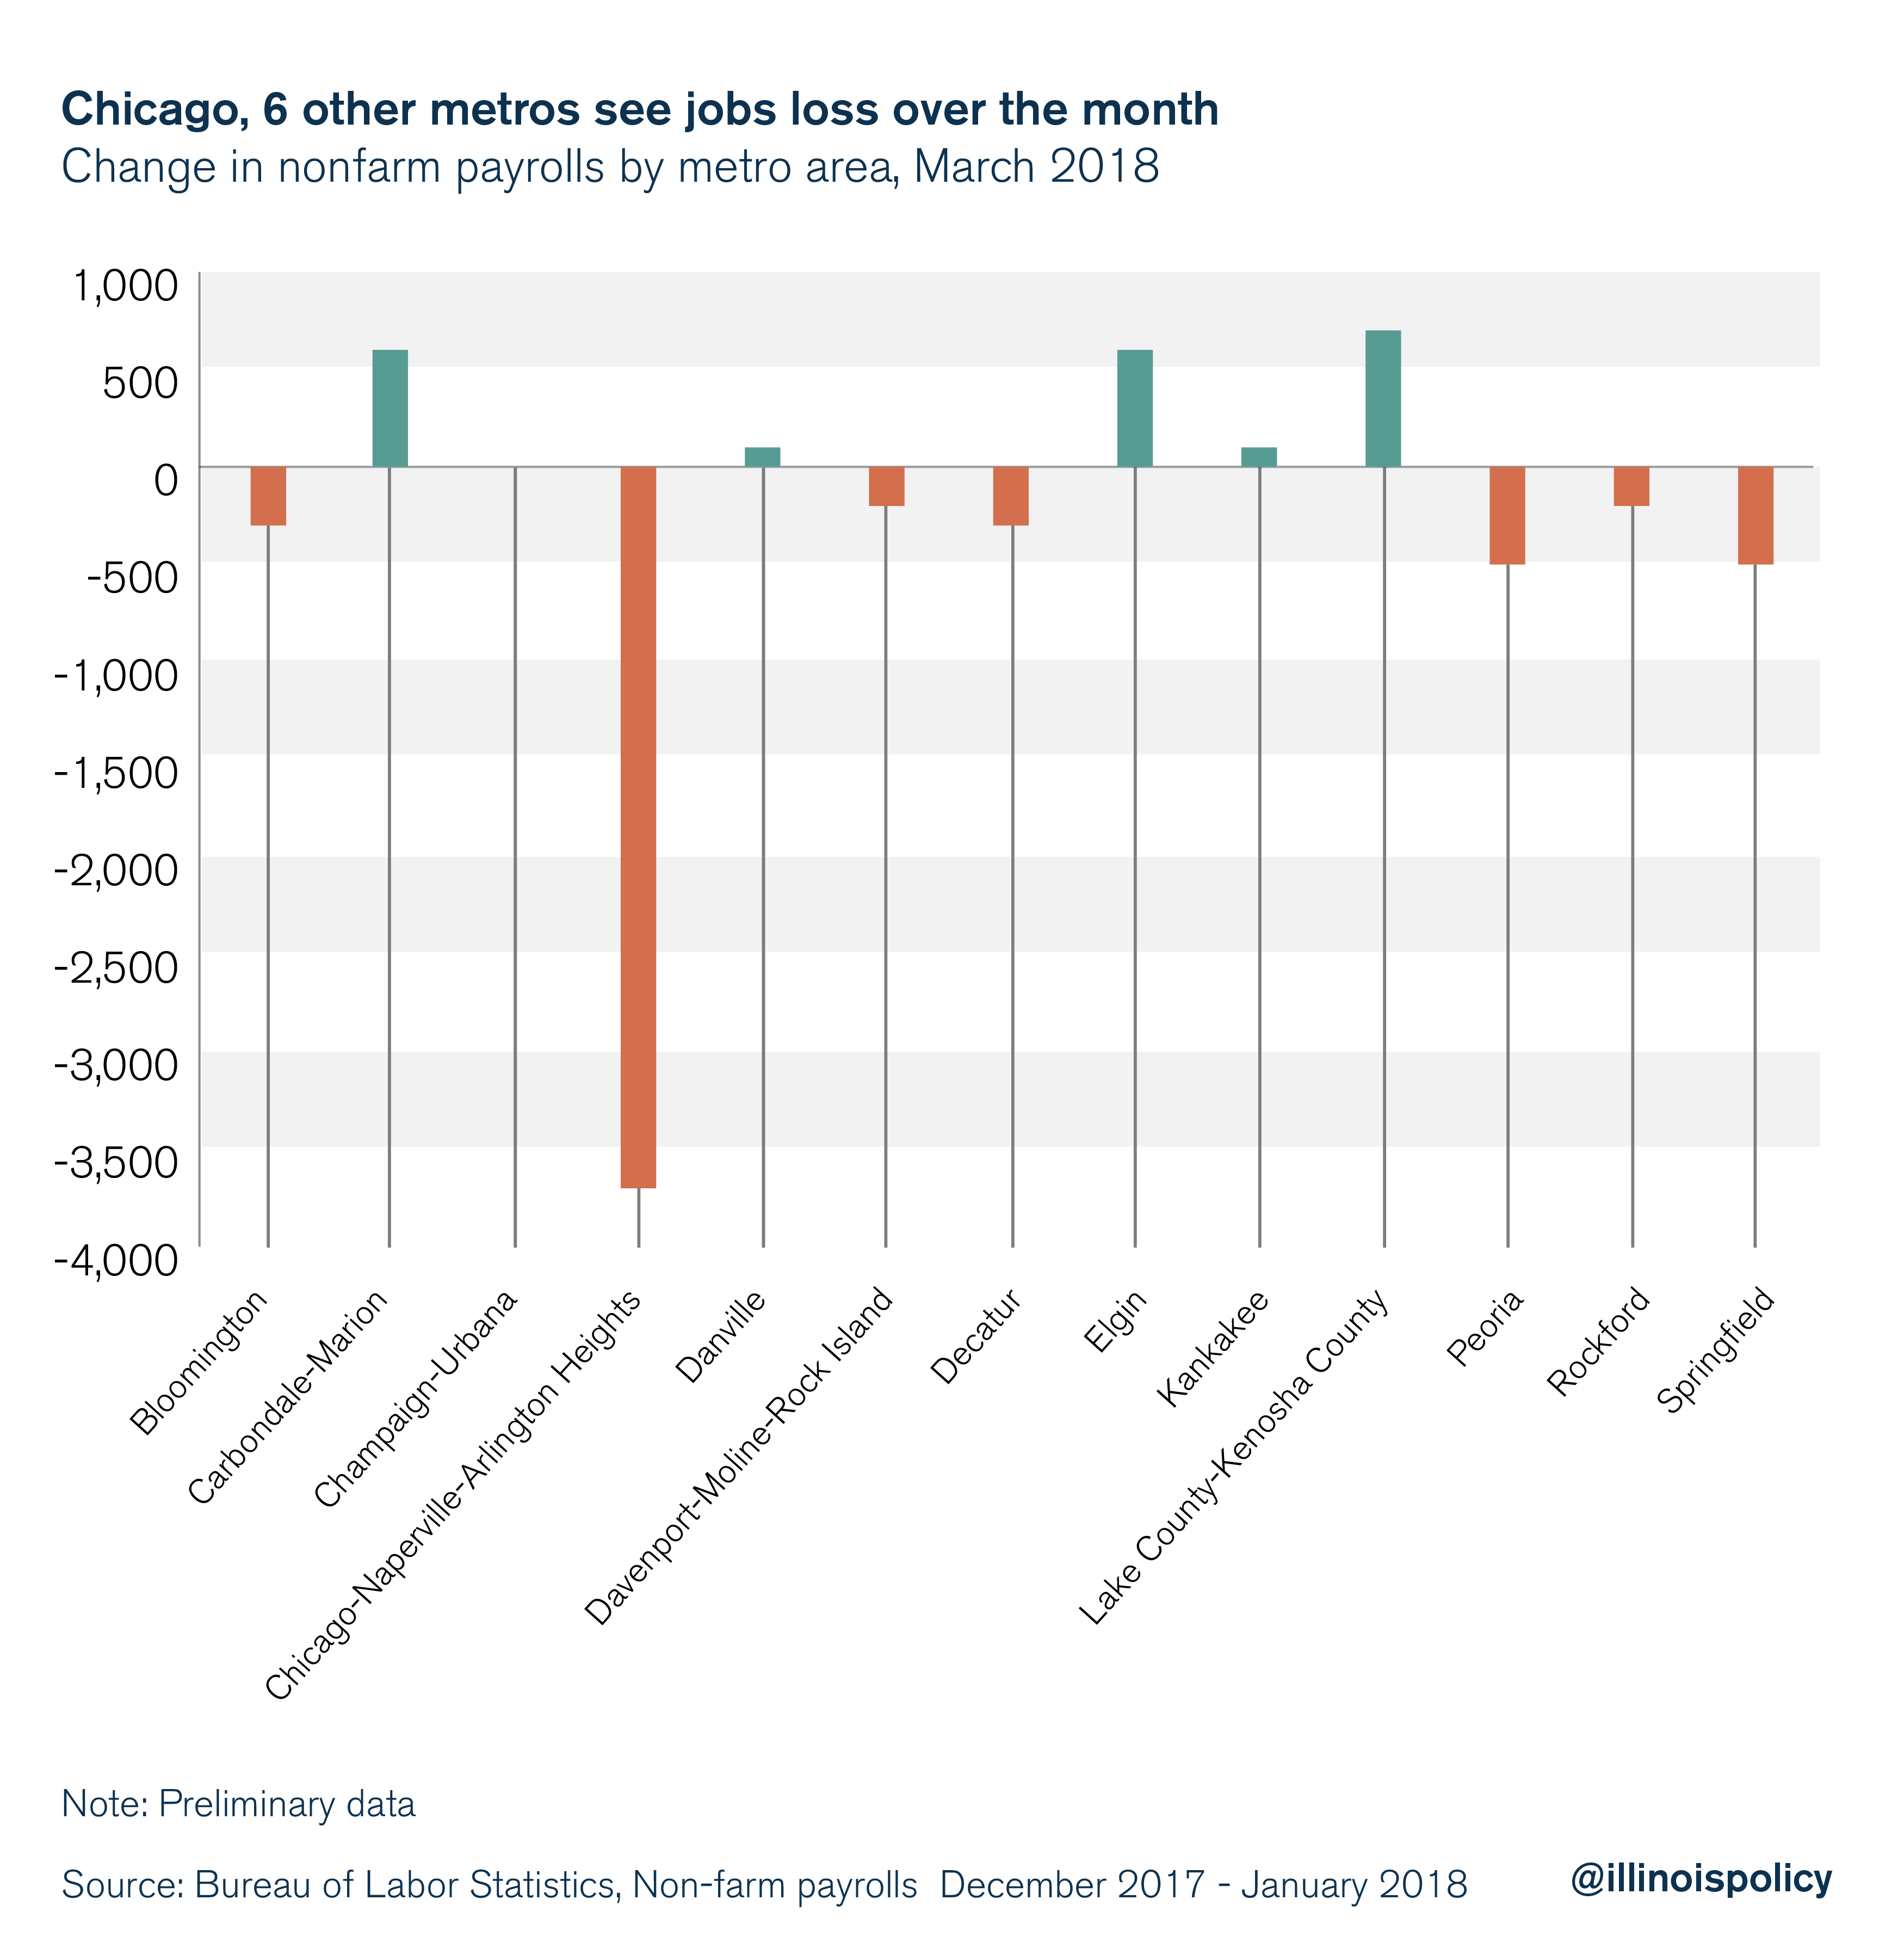 Chicago, 6 other metros see job loss over the month